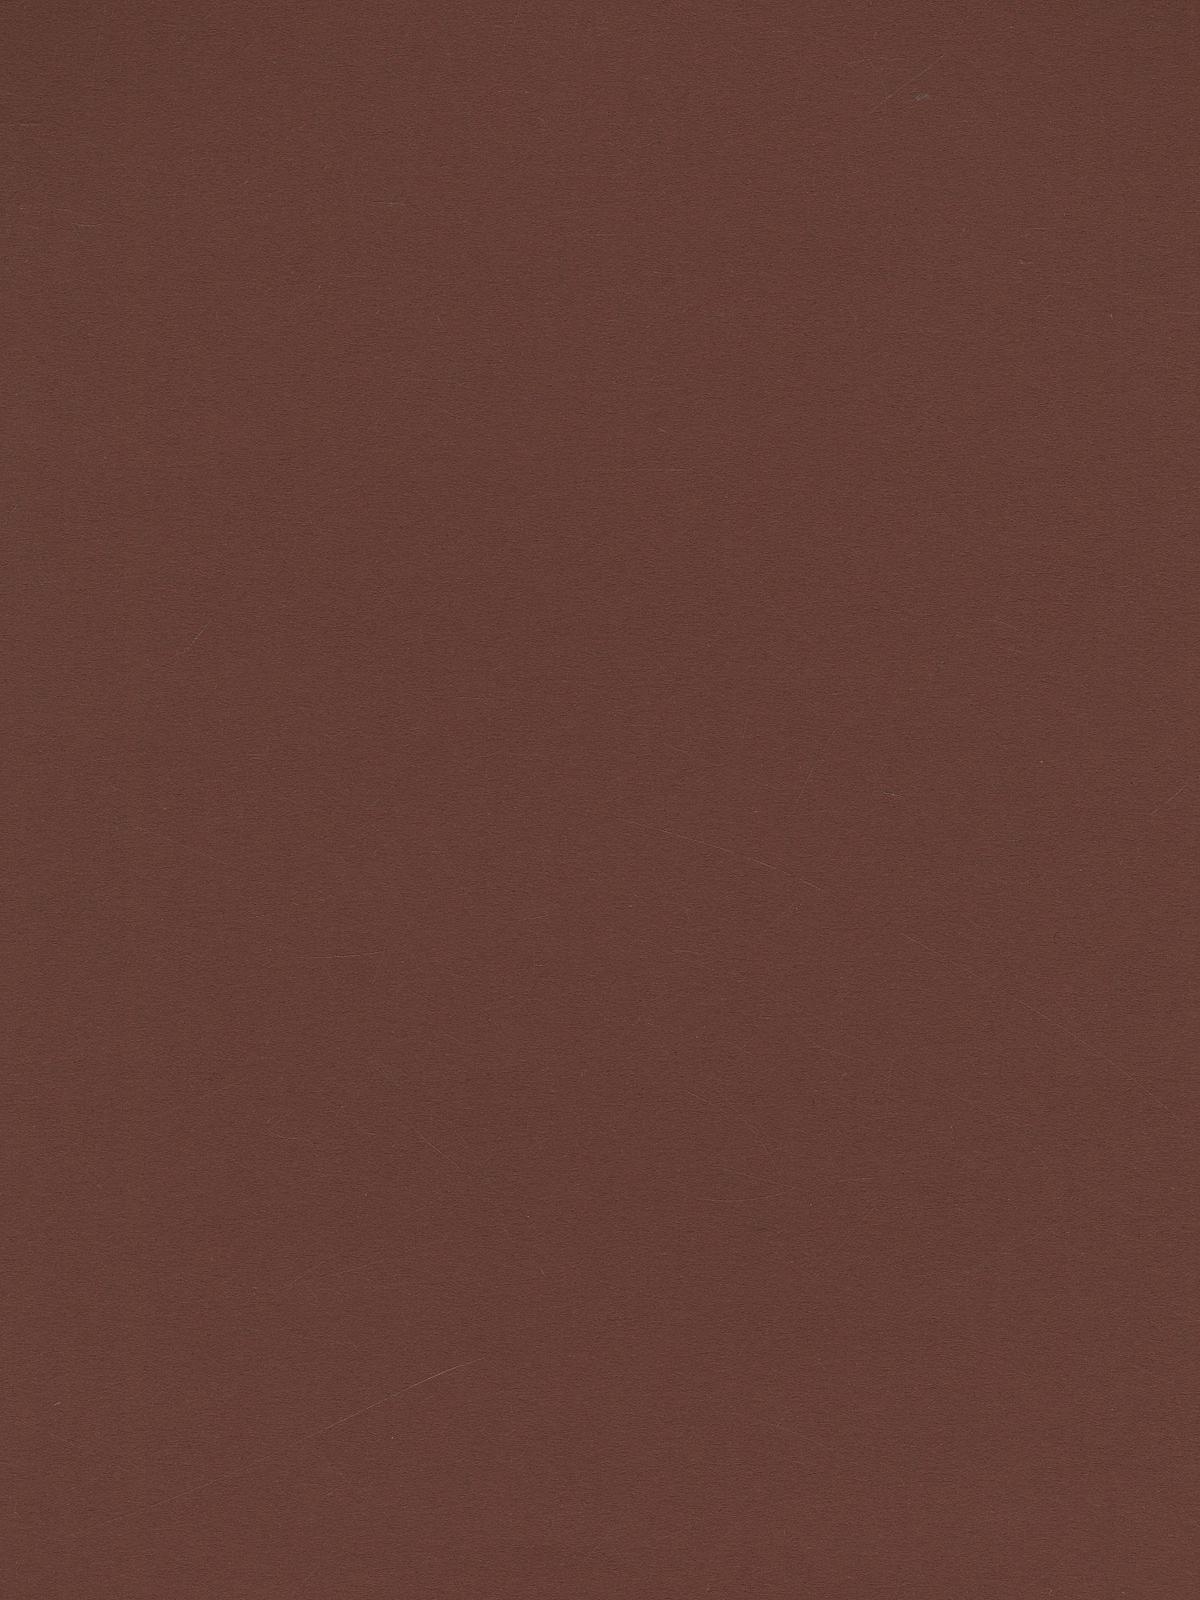 Art Paper Chocolate Brown 8.5 In. X 11 In.